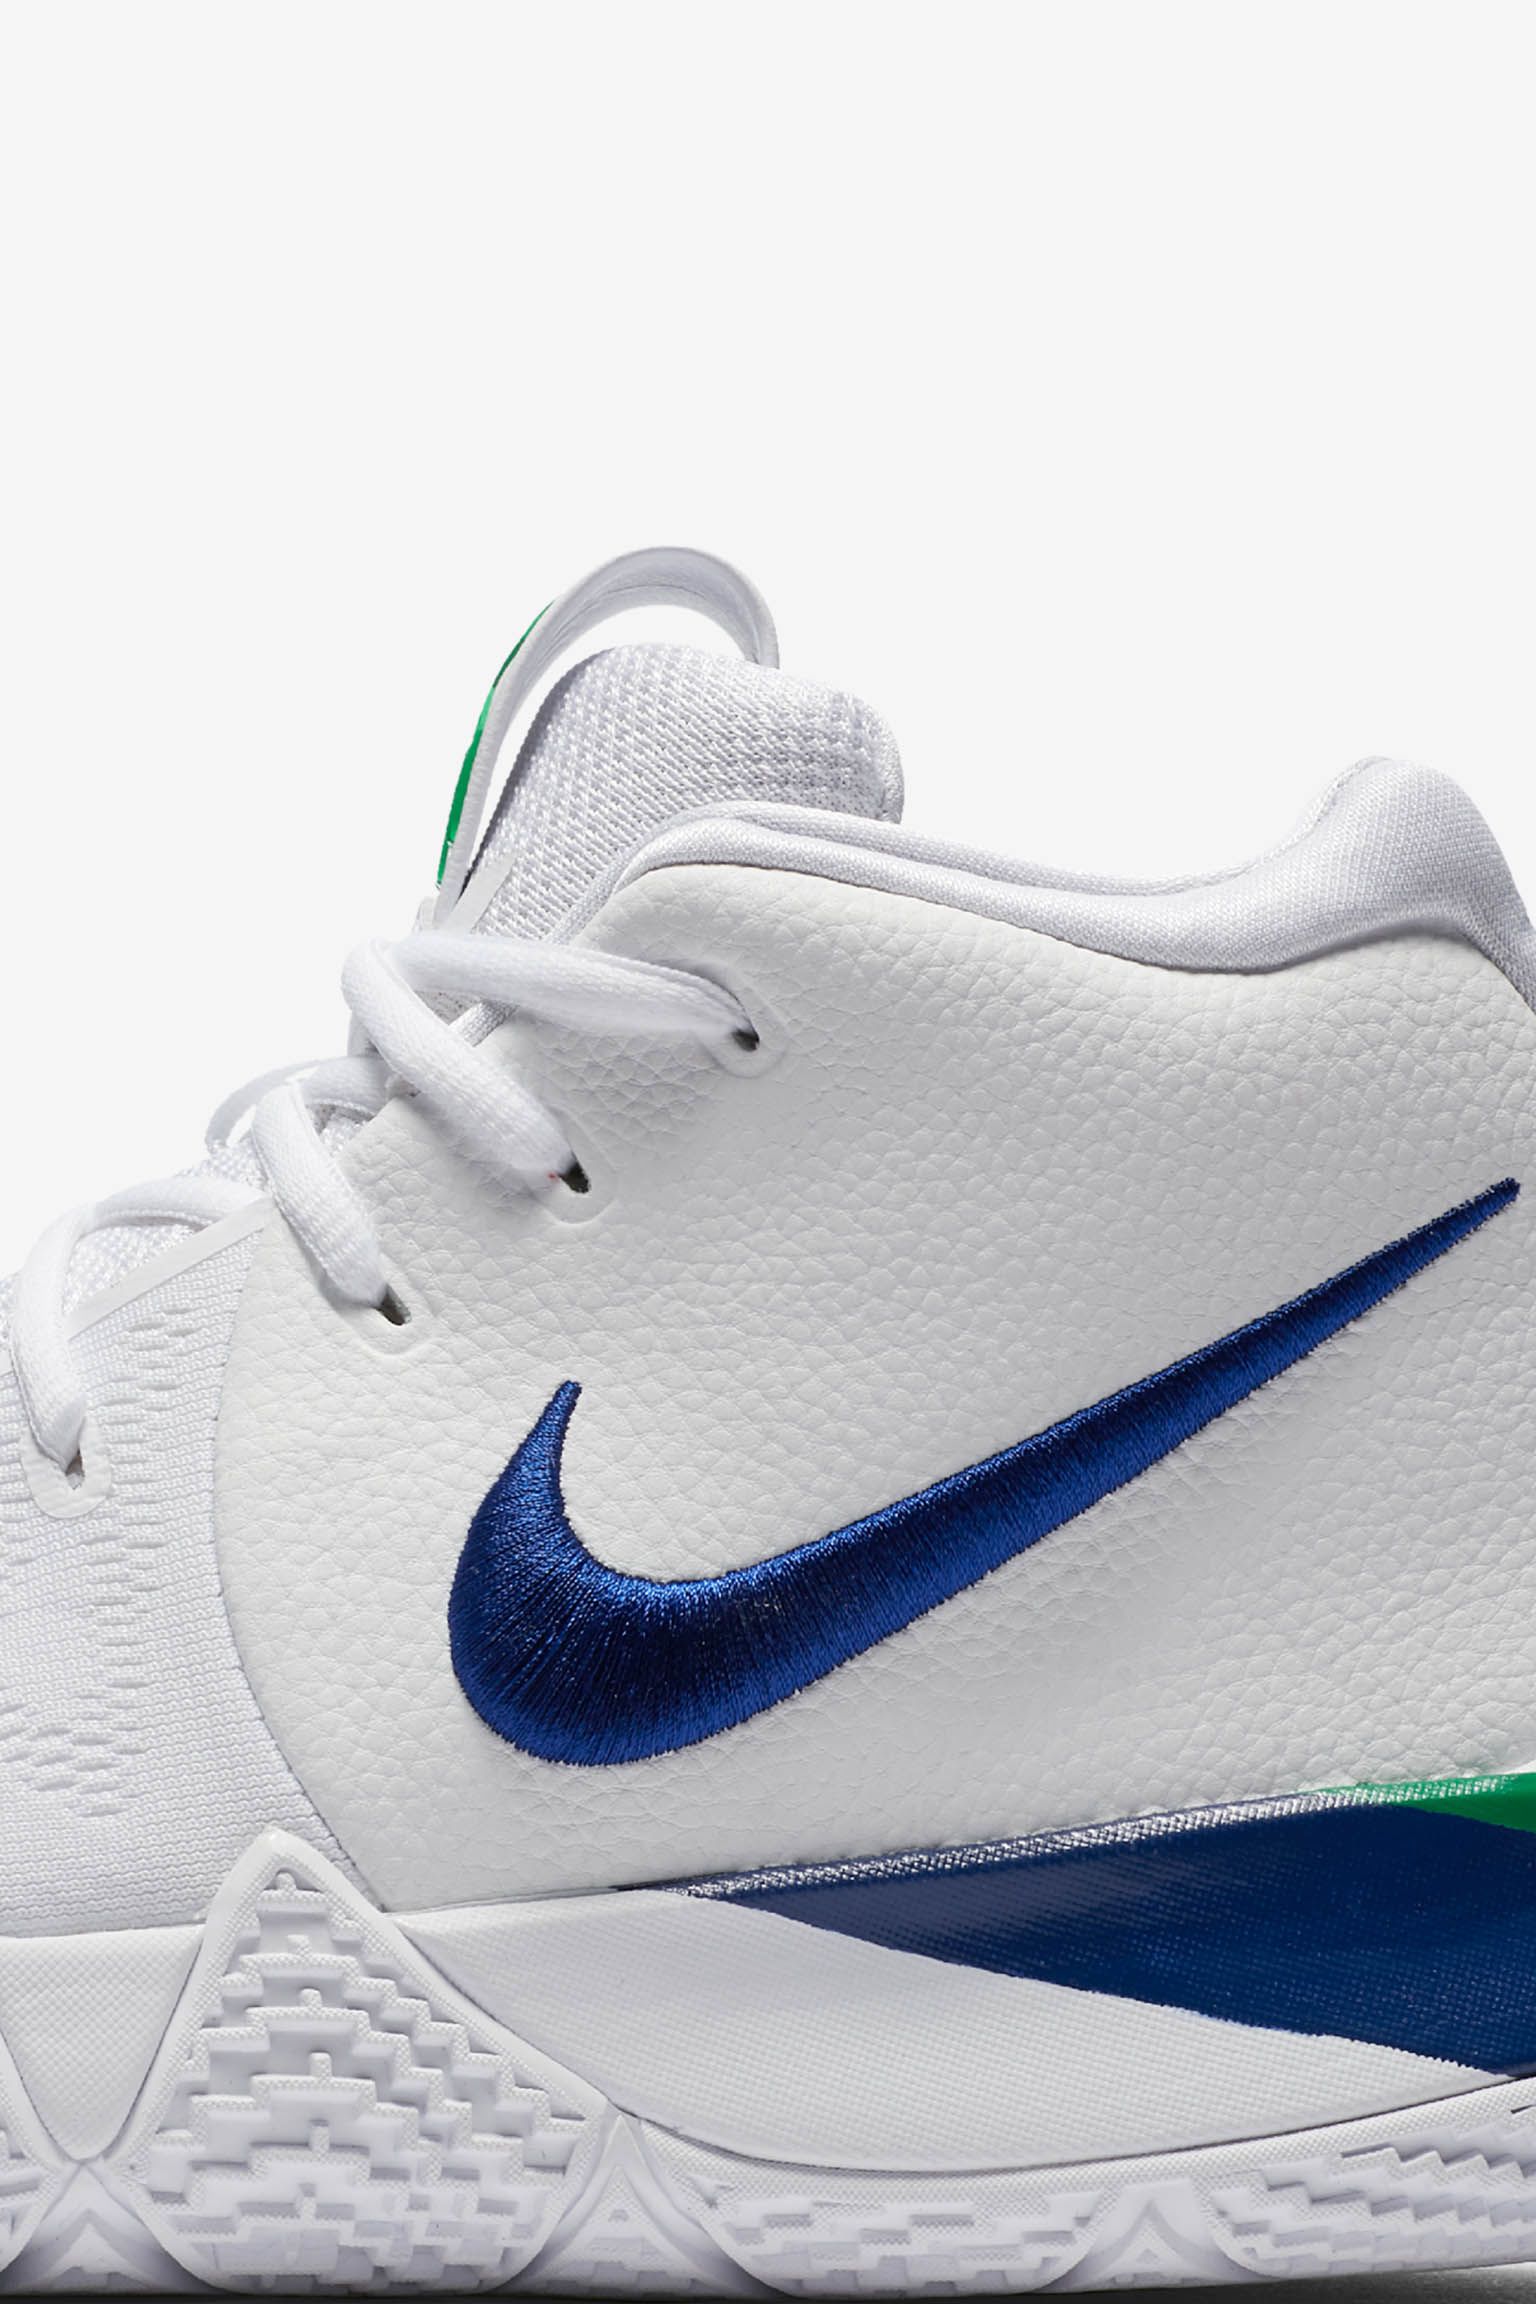 Nike Kyrie 4 Deep Royal Blue' Release Date. SNKRS PT